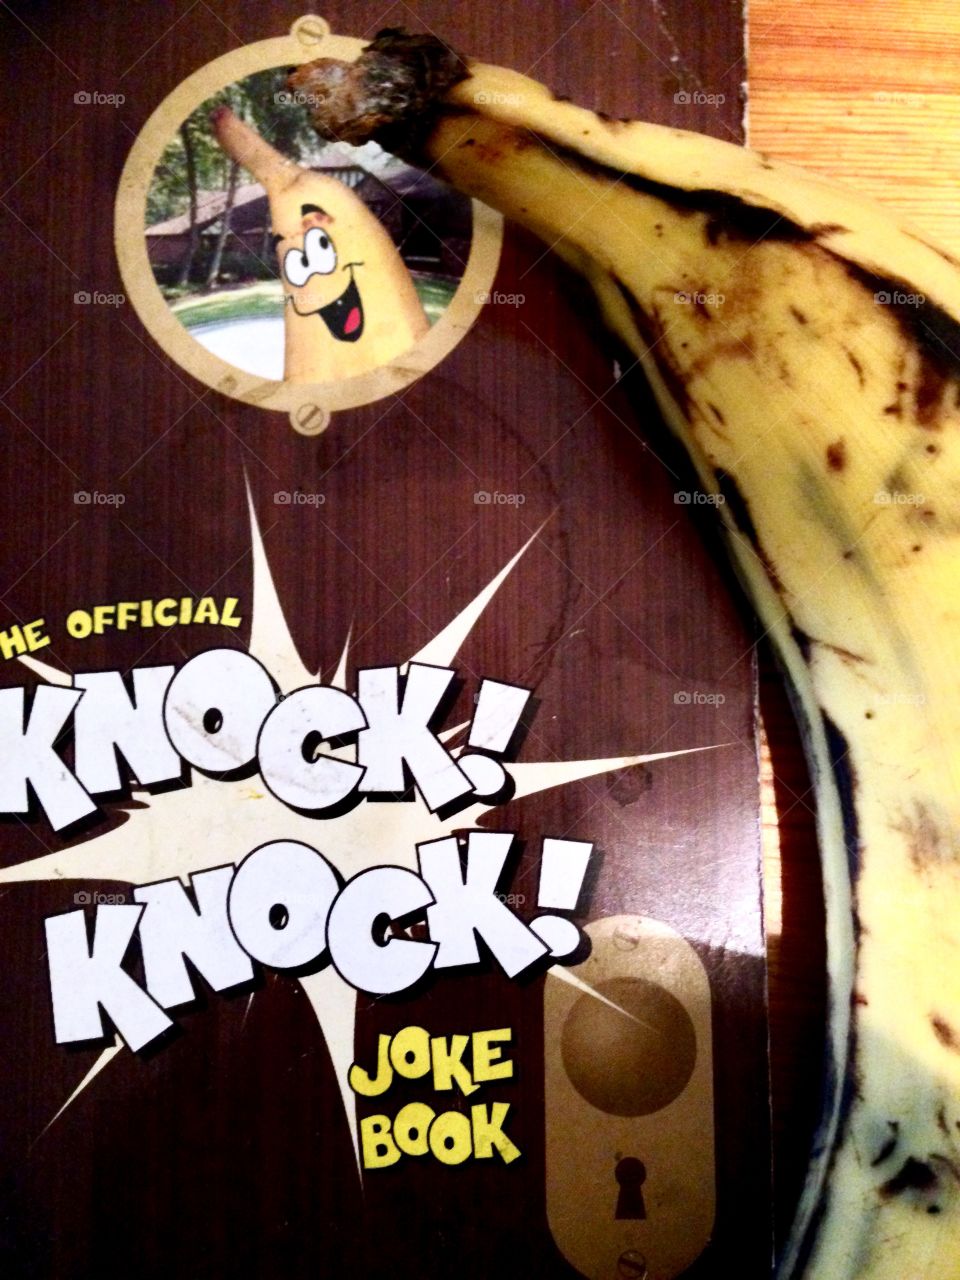 Knock Knock Who's There?

Published by:
HappyBrownMonkey 